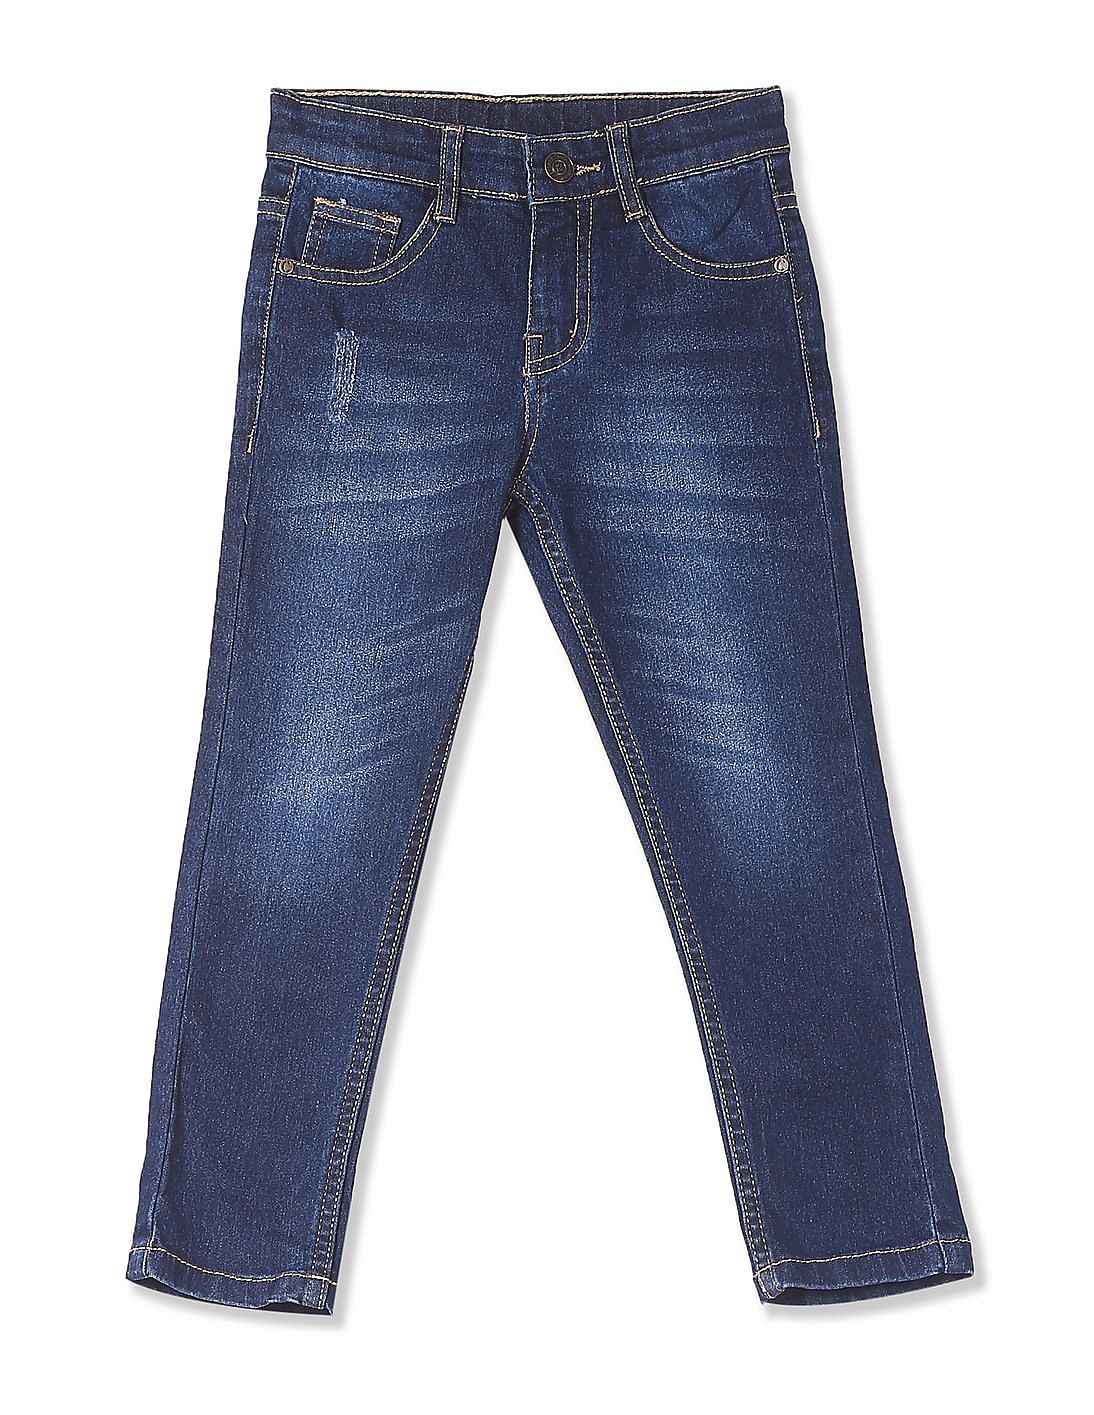 Buy Boys Boys Slim Fit Distressed Jeans online at NNNOW.com